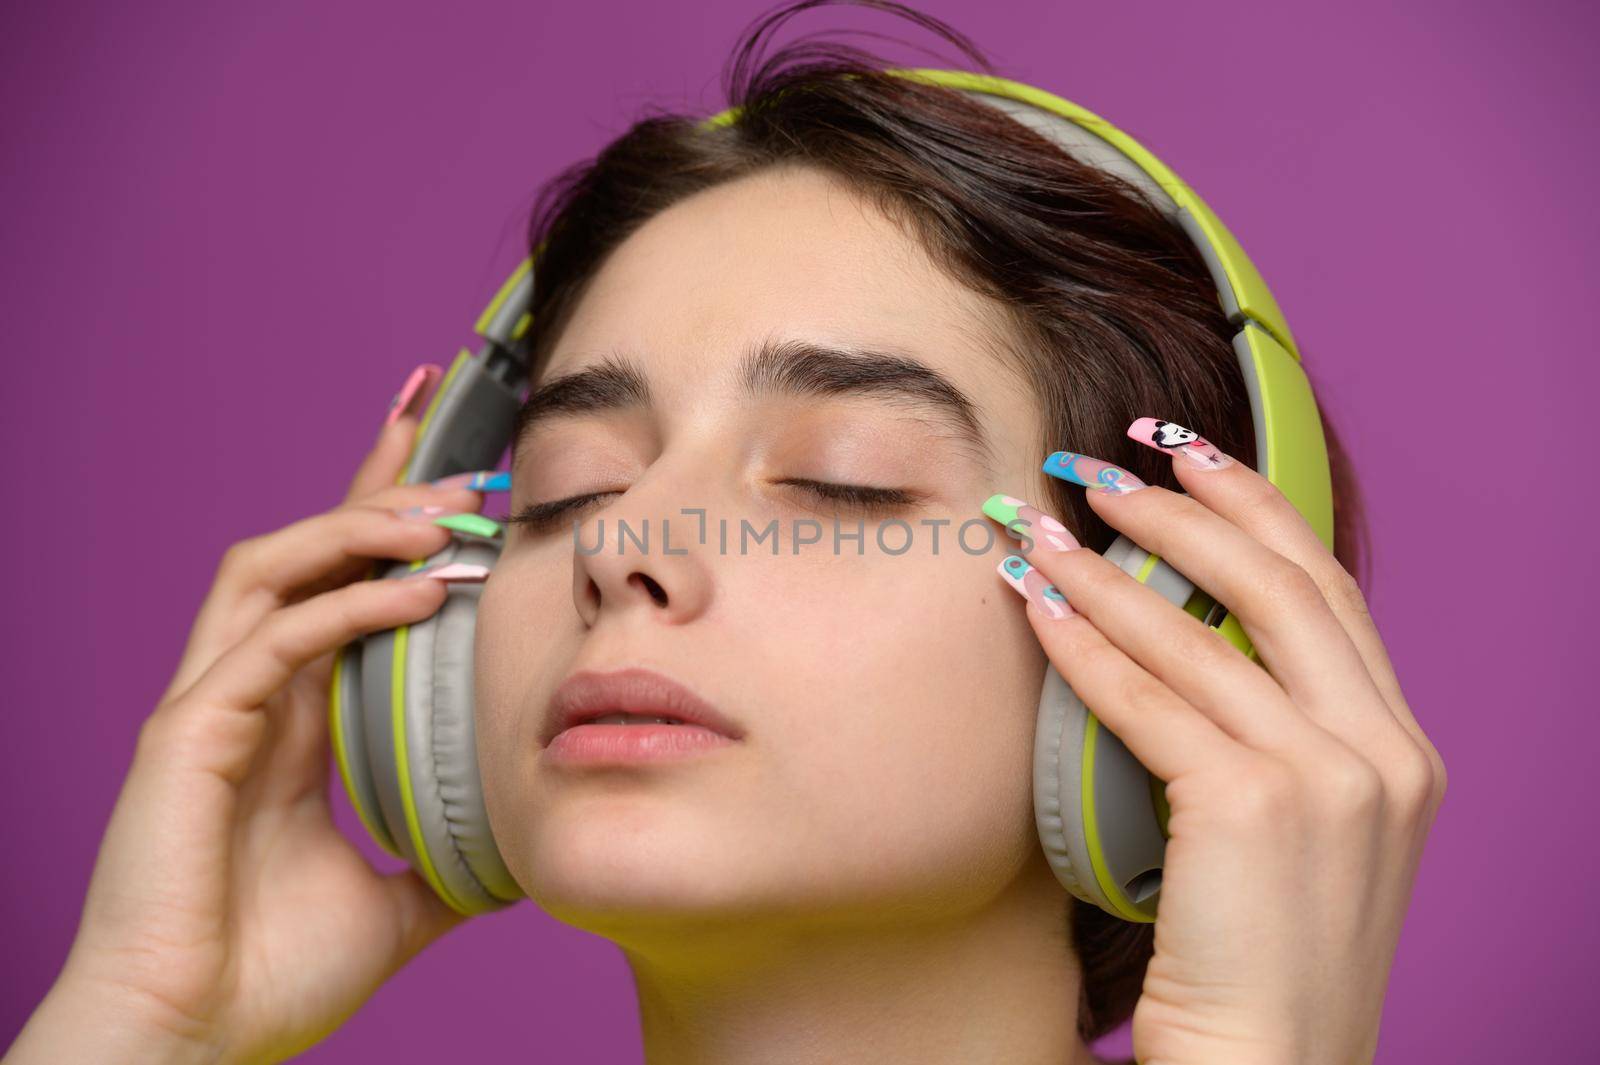 Affectionate pretty girl with short haircut and extravagant nail art wearing headphones by starush